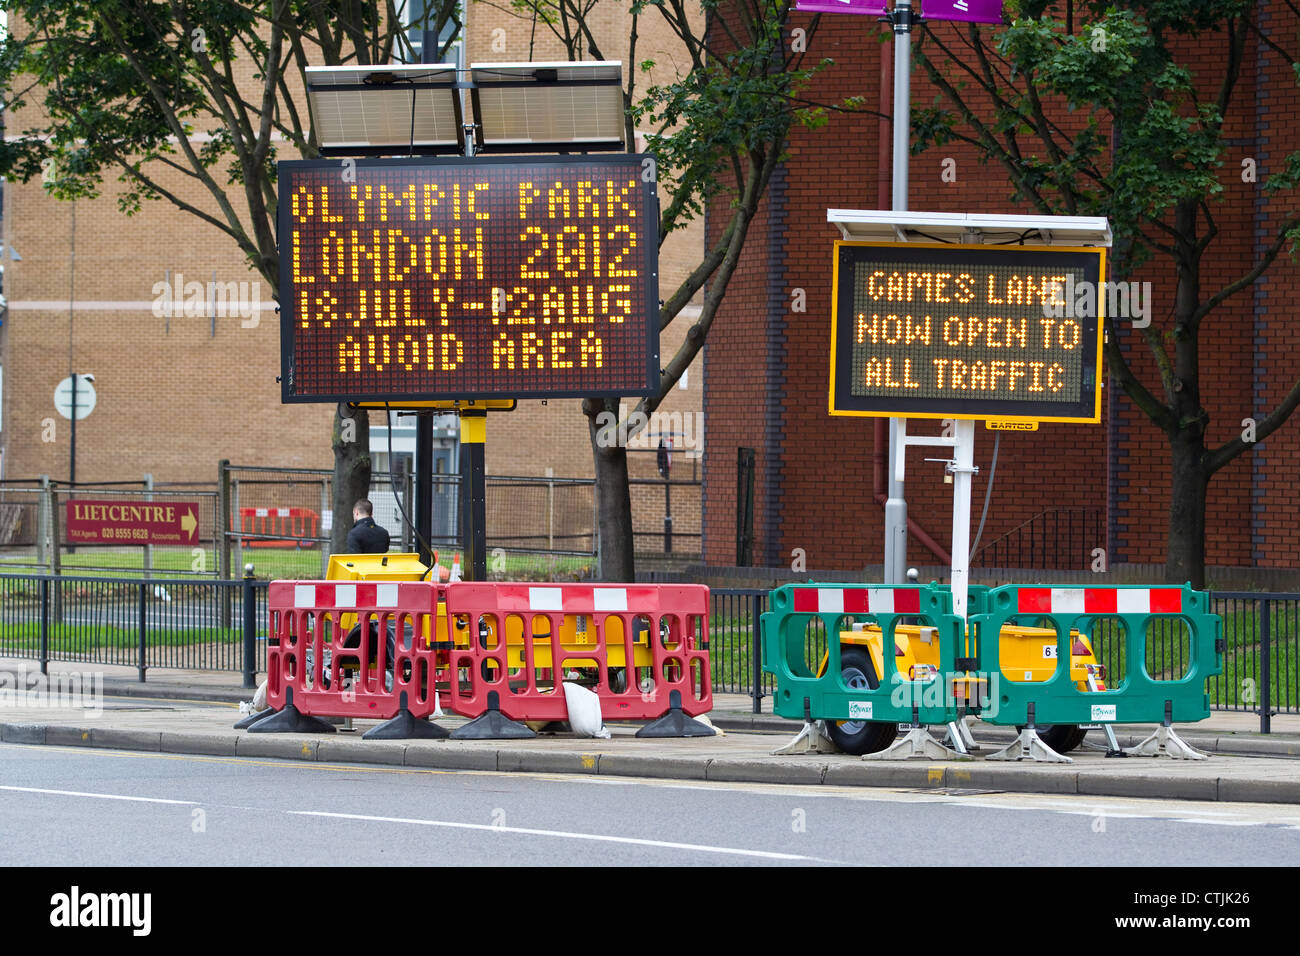 Electronic road signs in Stratford indicating to avoid the Olympic Park area during London 2012 when the Games Zil lanes open. Stock Photo